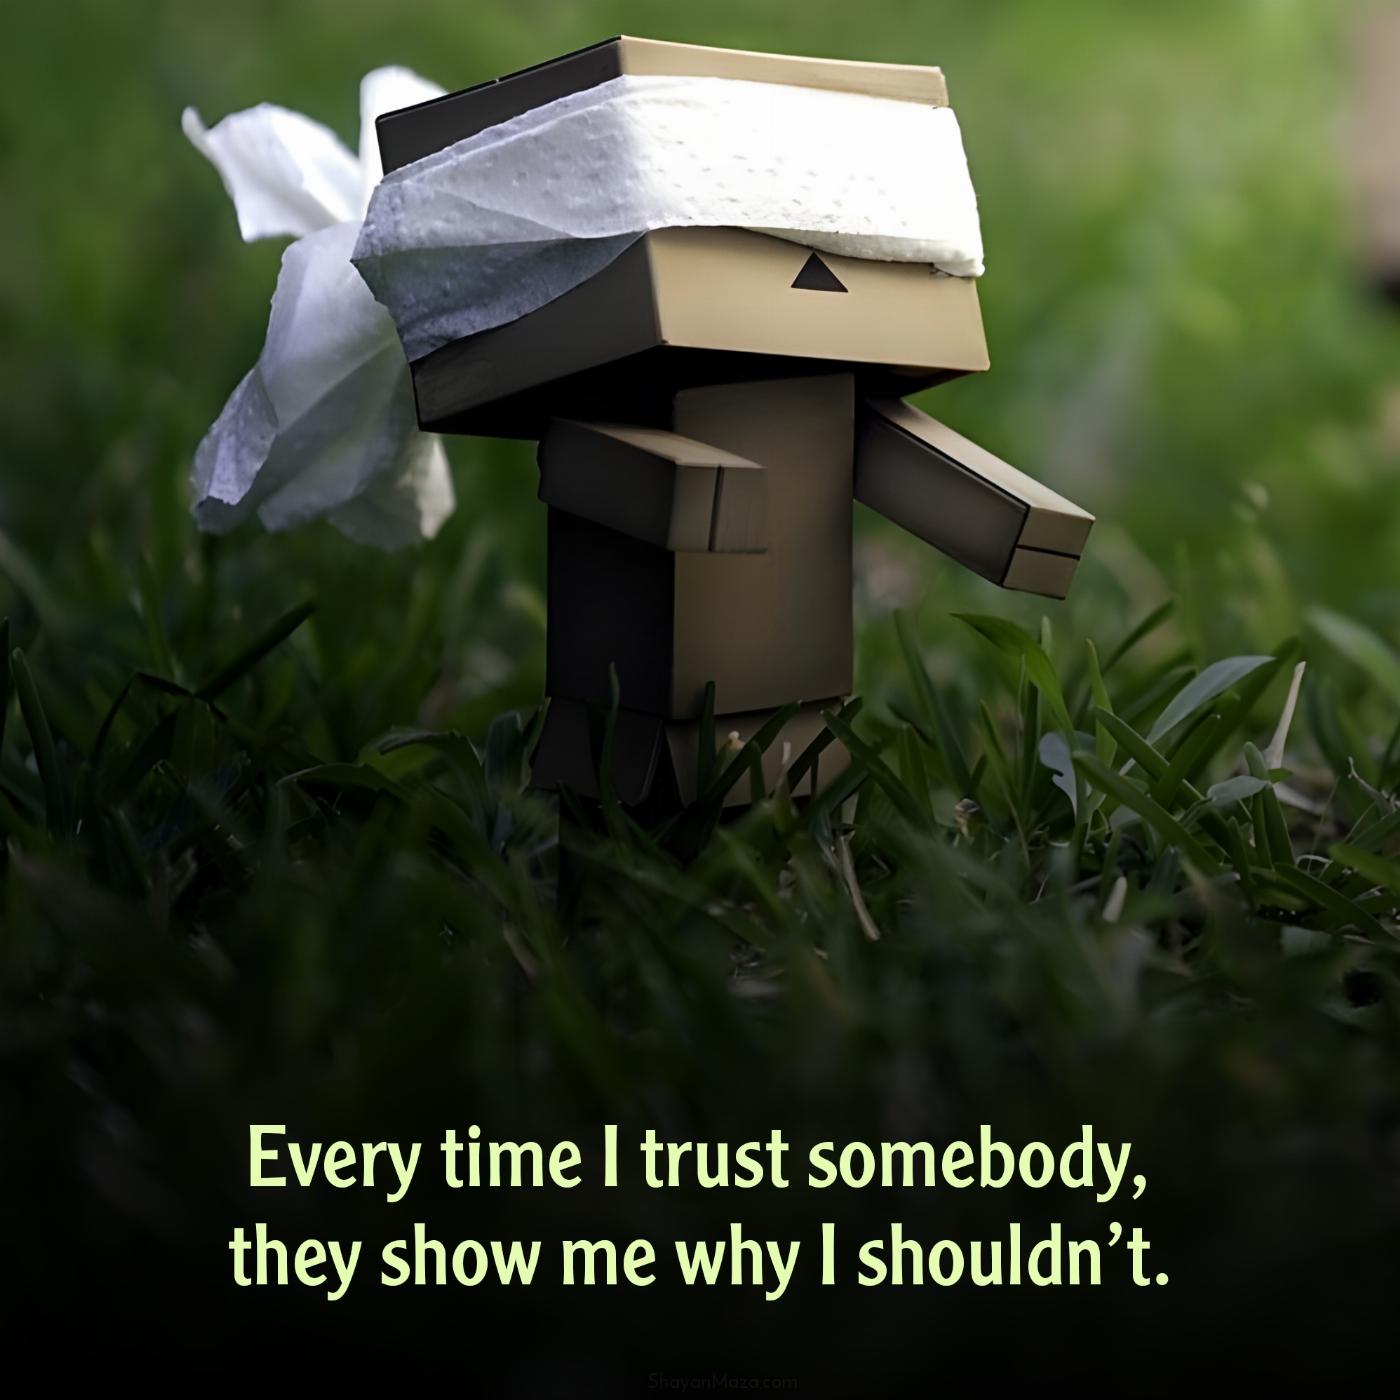 Every time I trust somebody they show me why I shouldnt